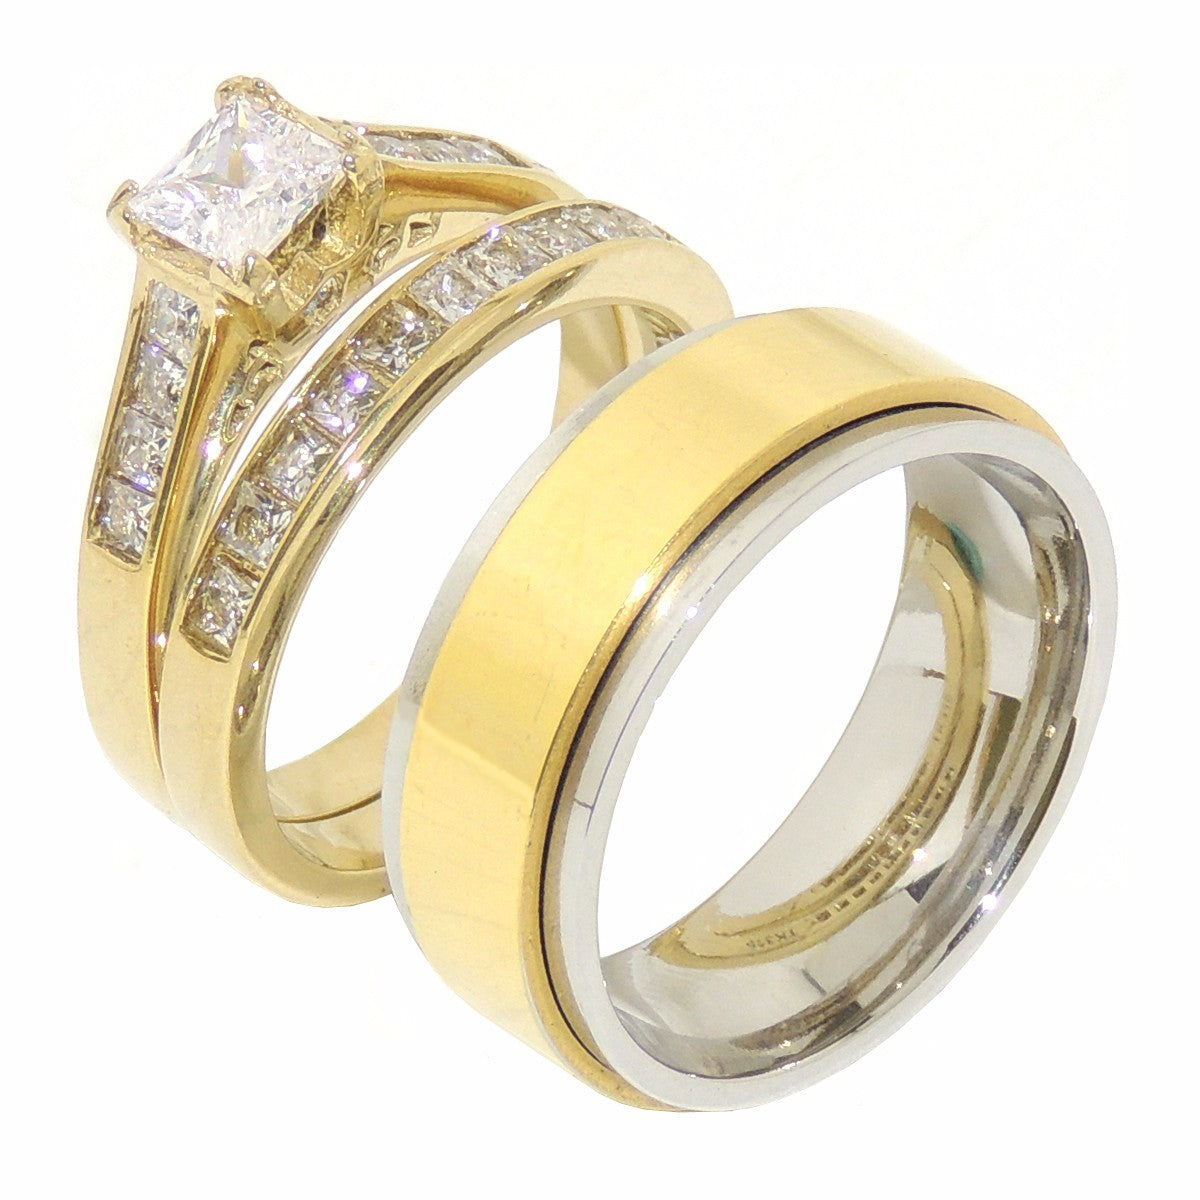 His Hers 5x5mm Princess CZ Gold IP Stainless Steel Wedding Set Mens Gold Spinning Band - LA NY Jewelry